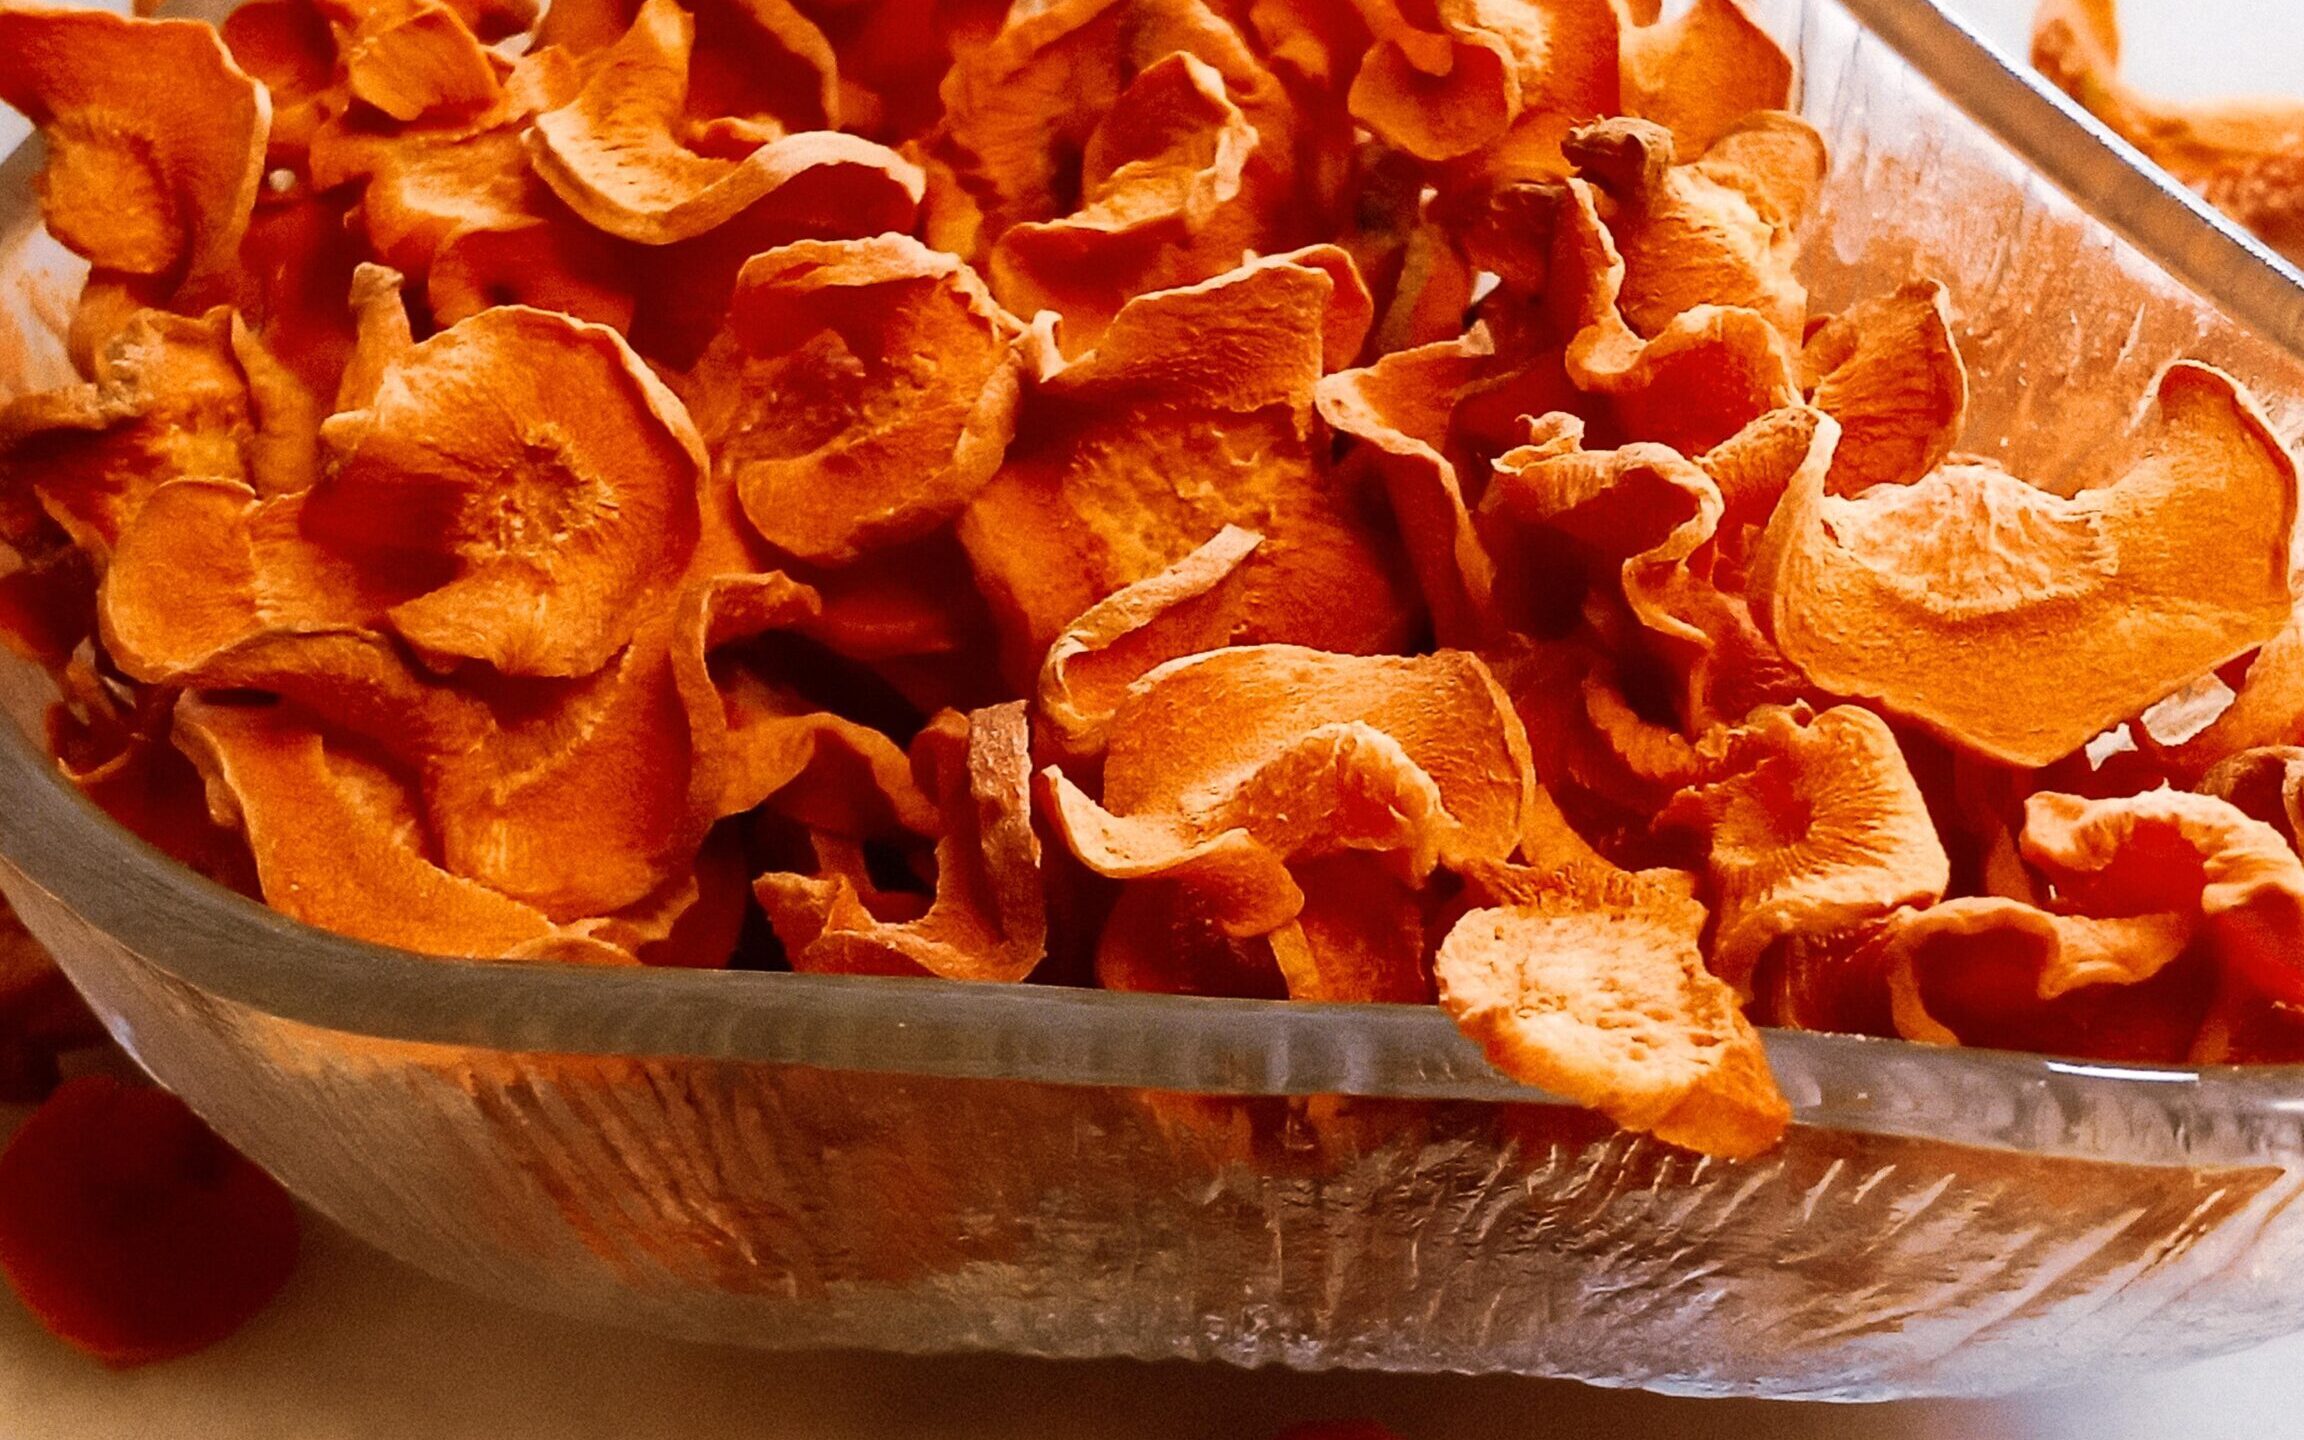 Dehydrated carrot chips in a bowl.